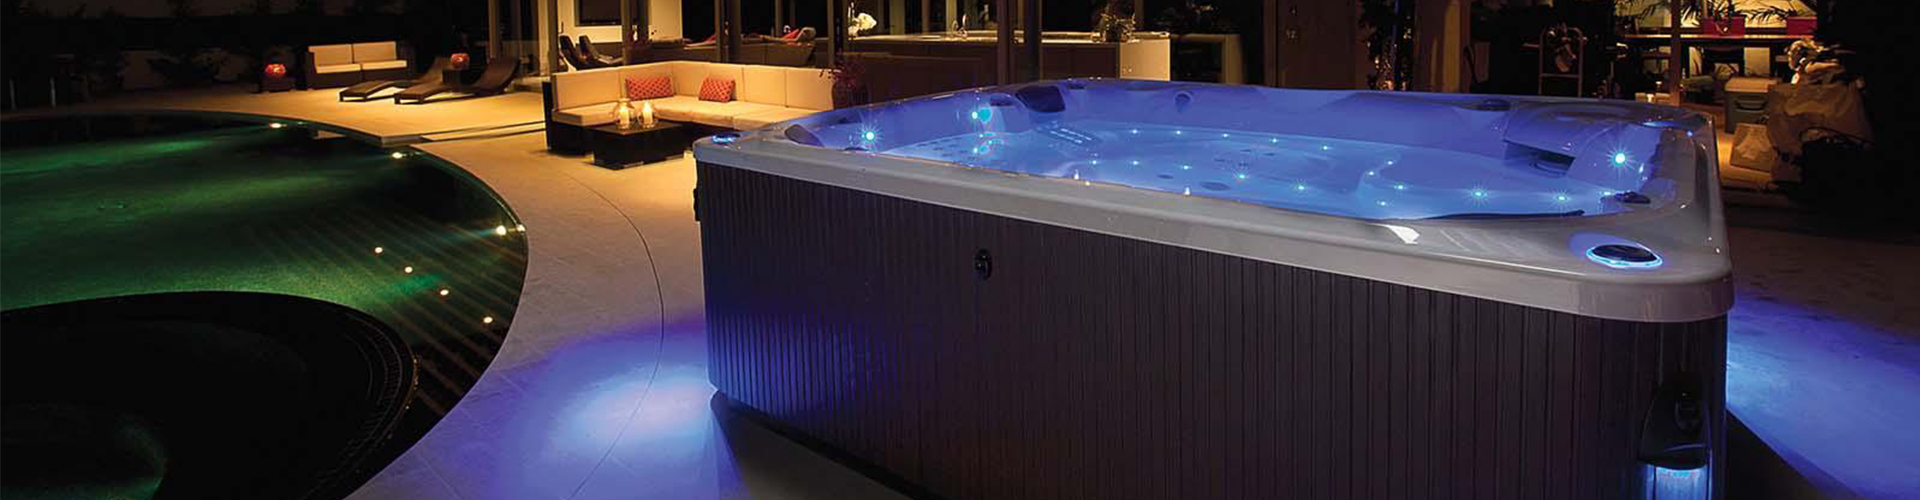 The Art of Hot Tub RelaxationImage